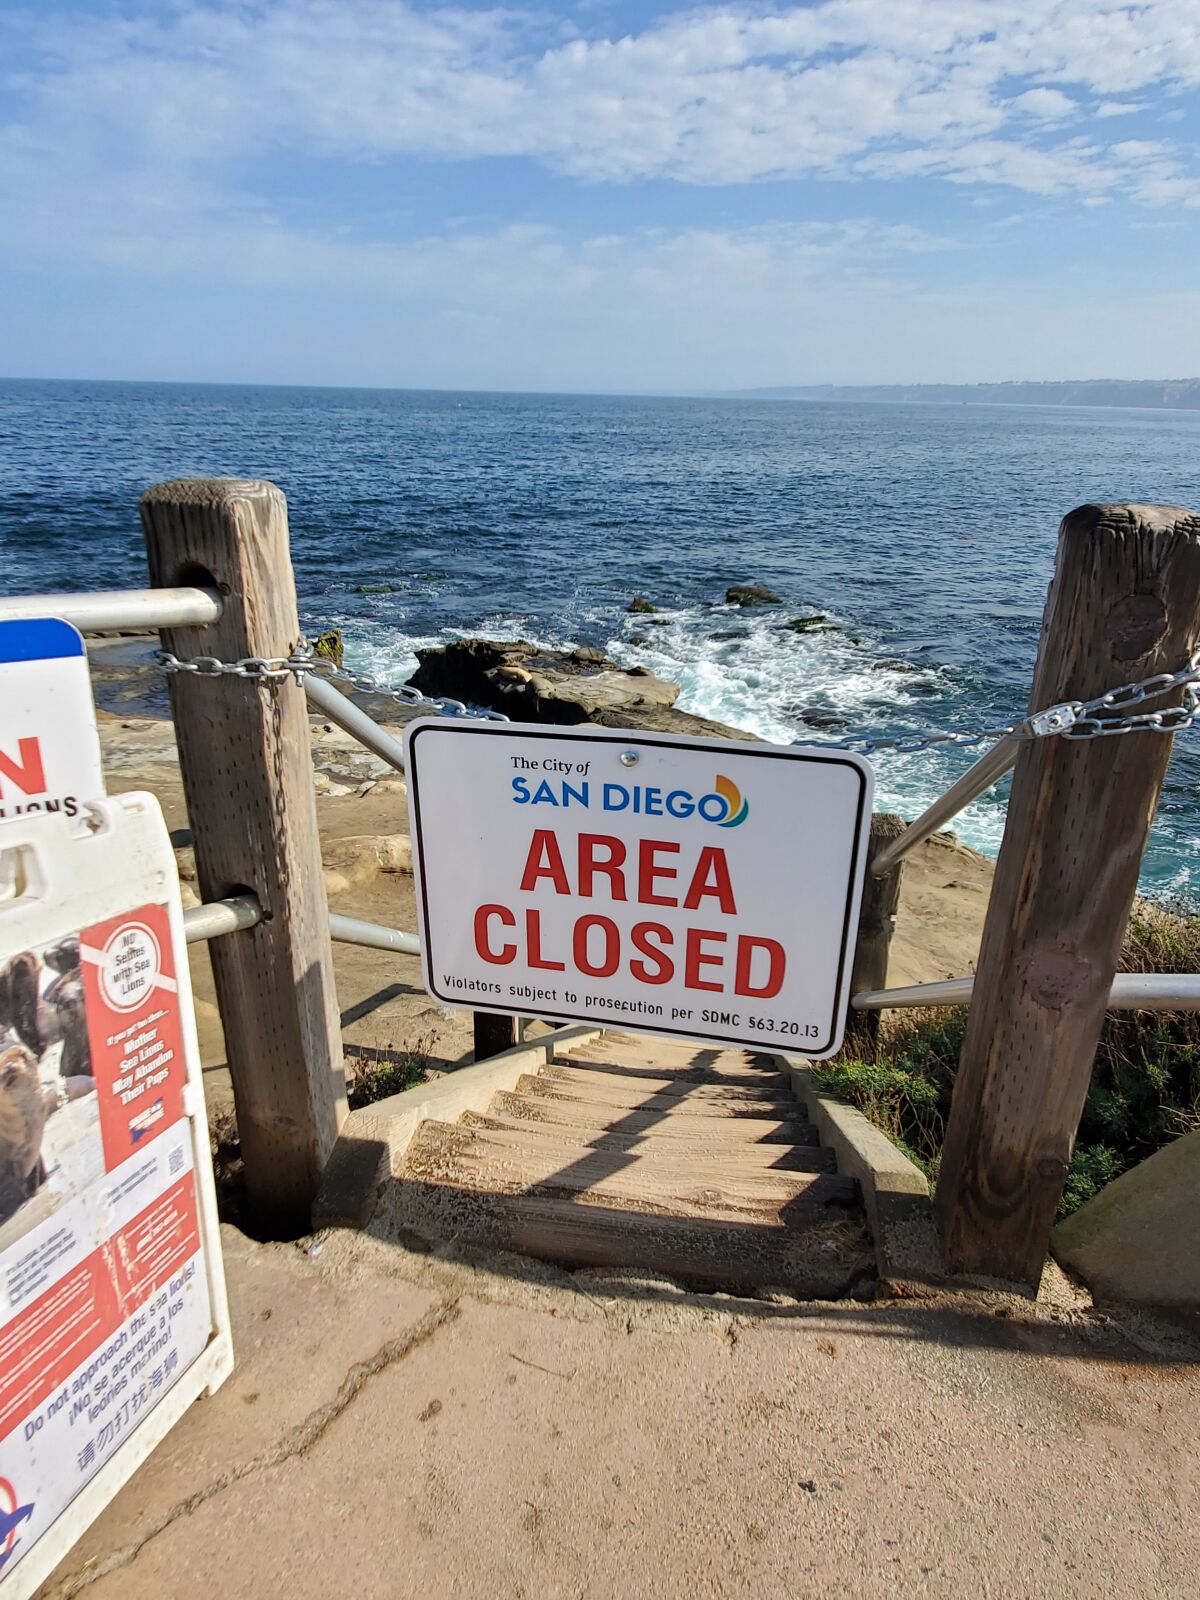 An "area closed" sign blocks off access to the beach